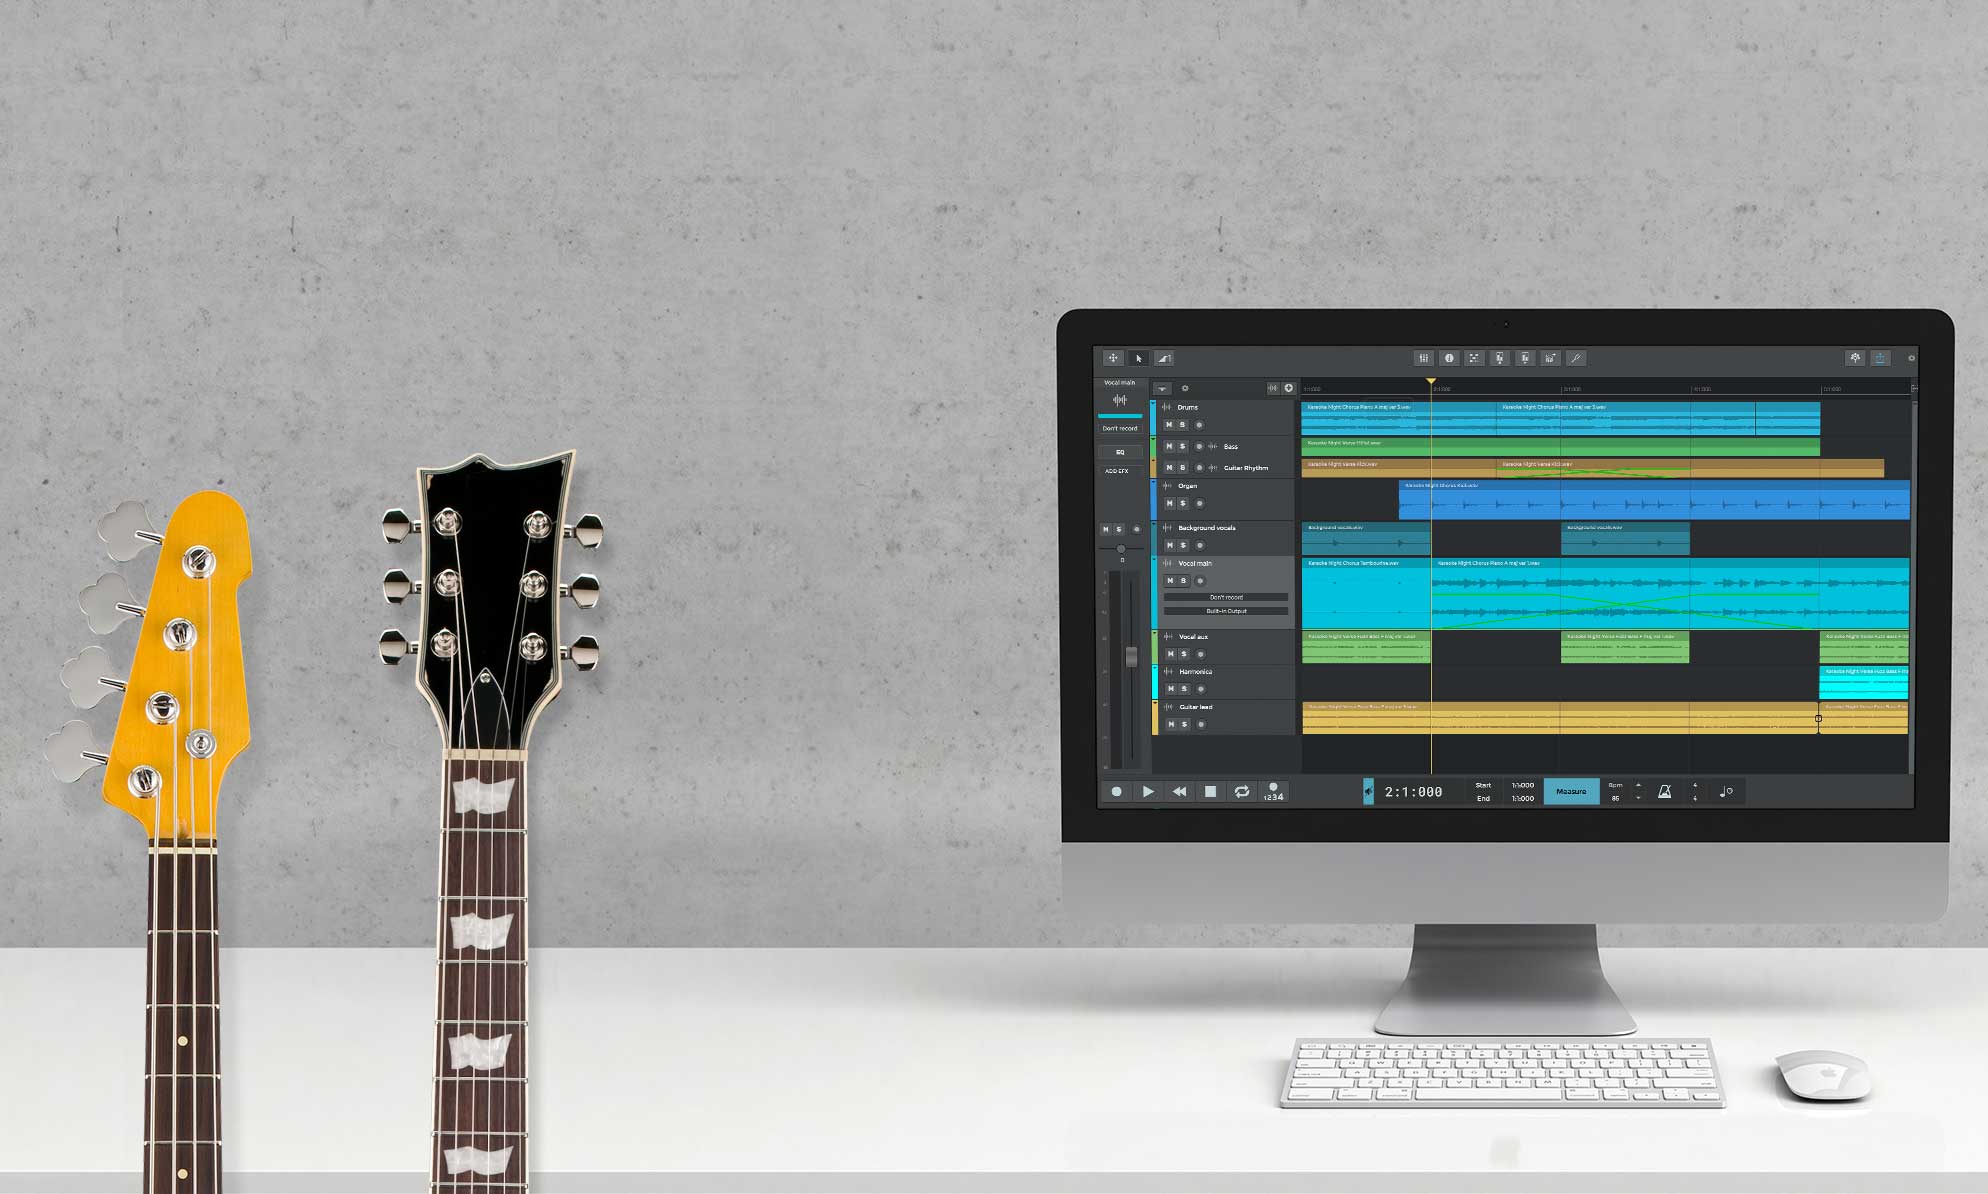 Free download studio recording software for android tablets